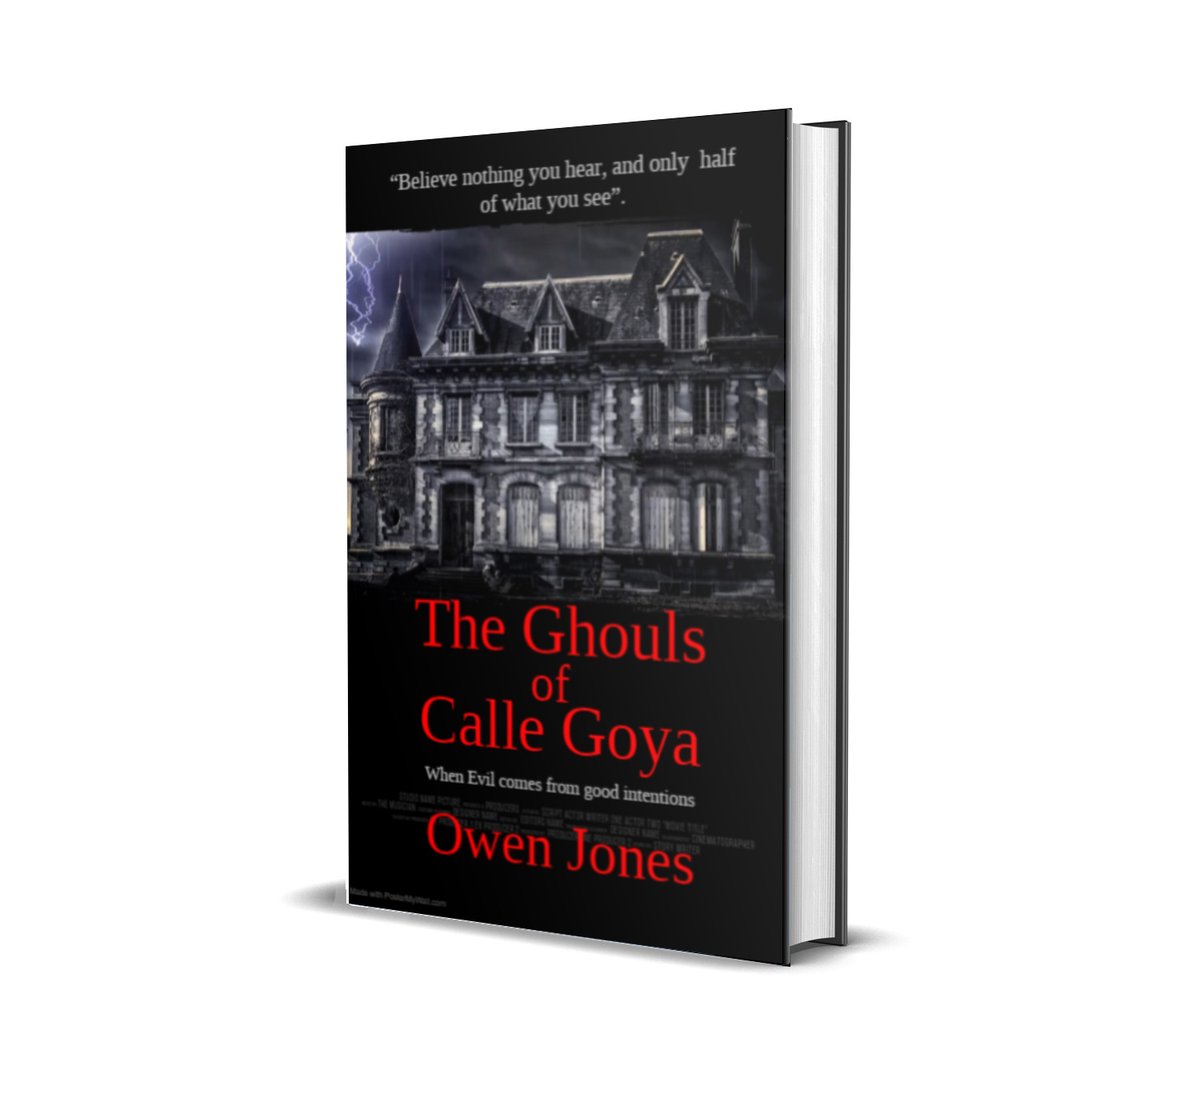 What can Frank do when his wife, Joy, is convinced that ghouls are plaguing her? This #spooky tale will #scare you! 'THE GHOULS OF CALLE GOYA' by Owen Jones. Set in Fuengirola, Malaga, Andalusia, Spain. https://t.co/1gs55Sxhpm https://t.co/gC4X148eTx